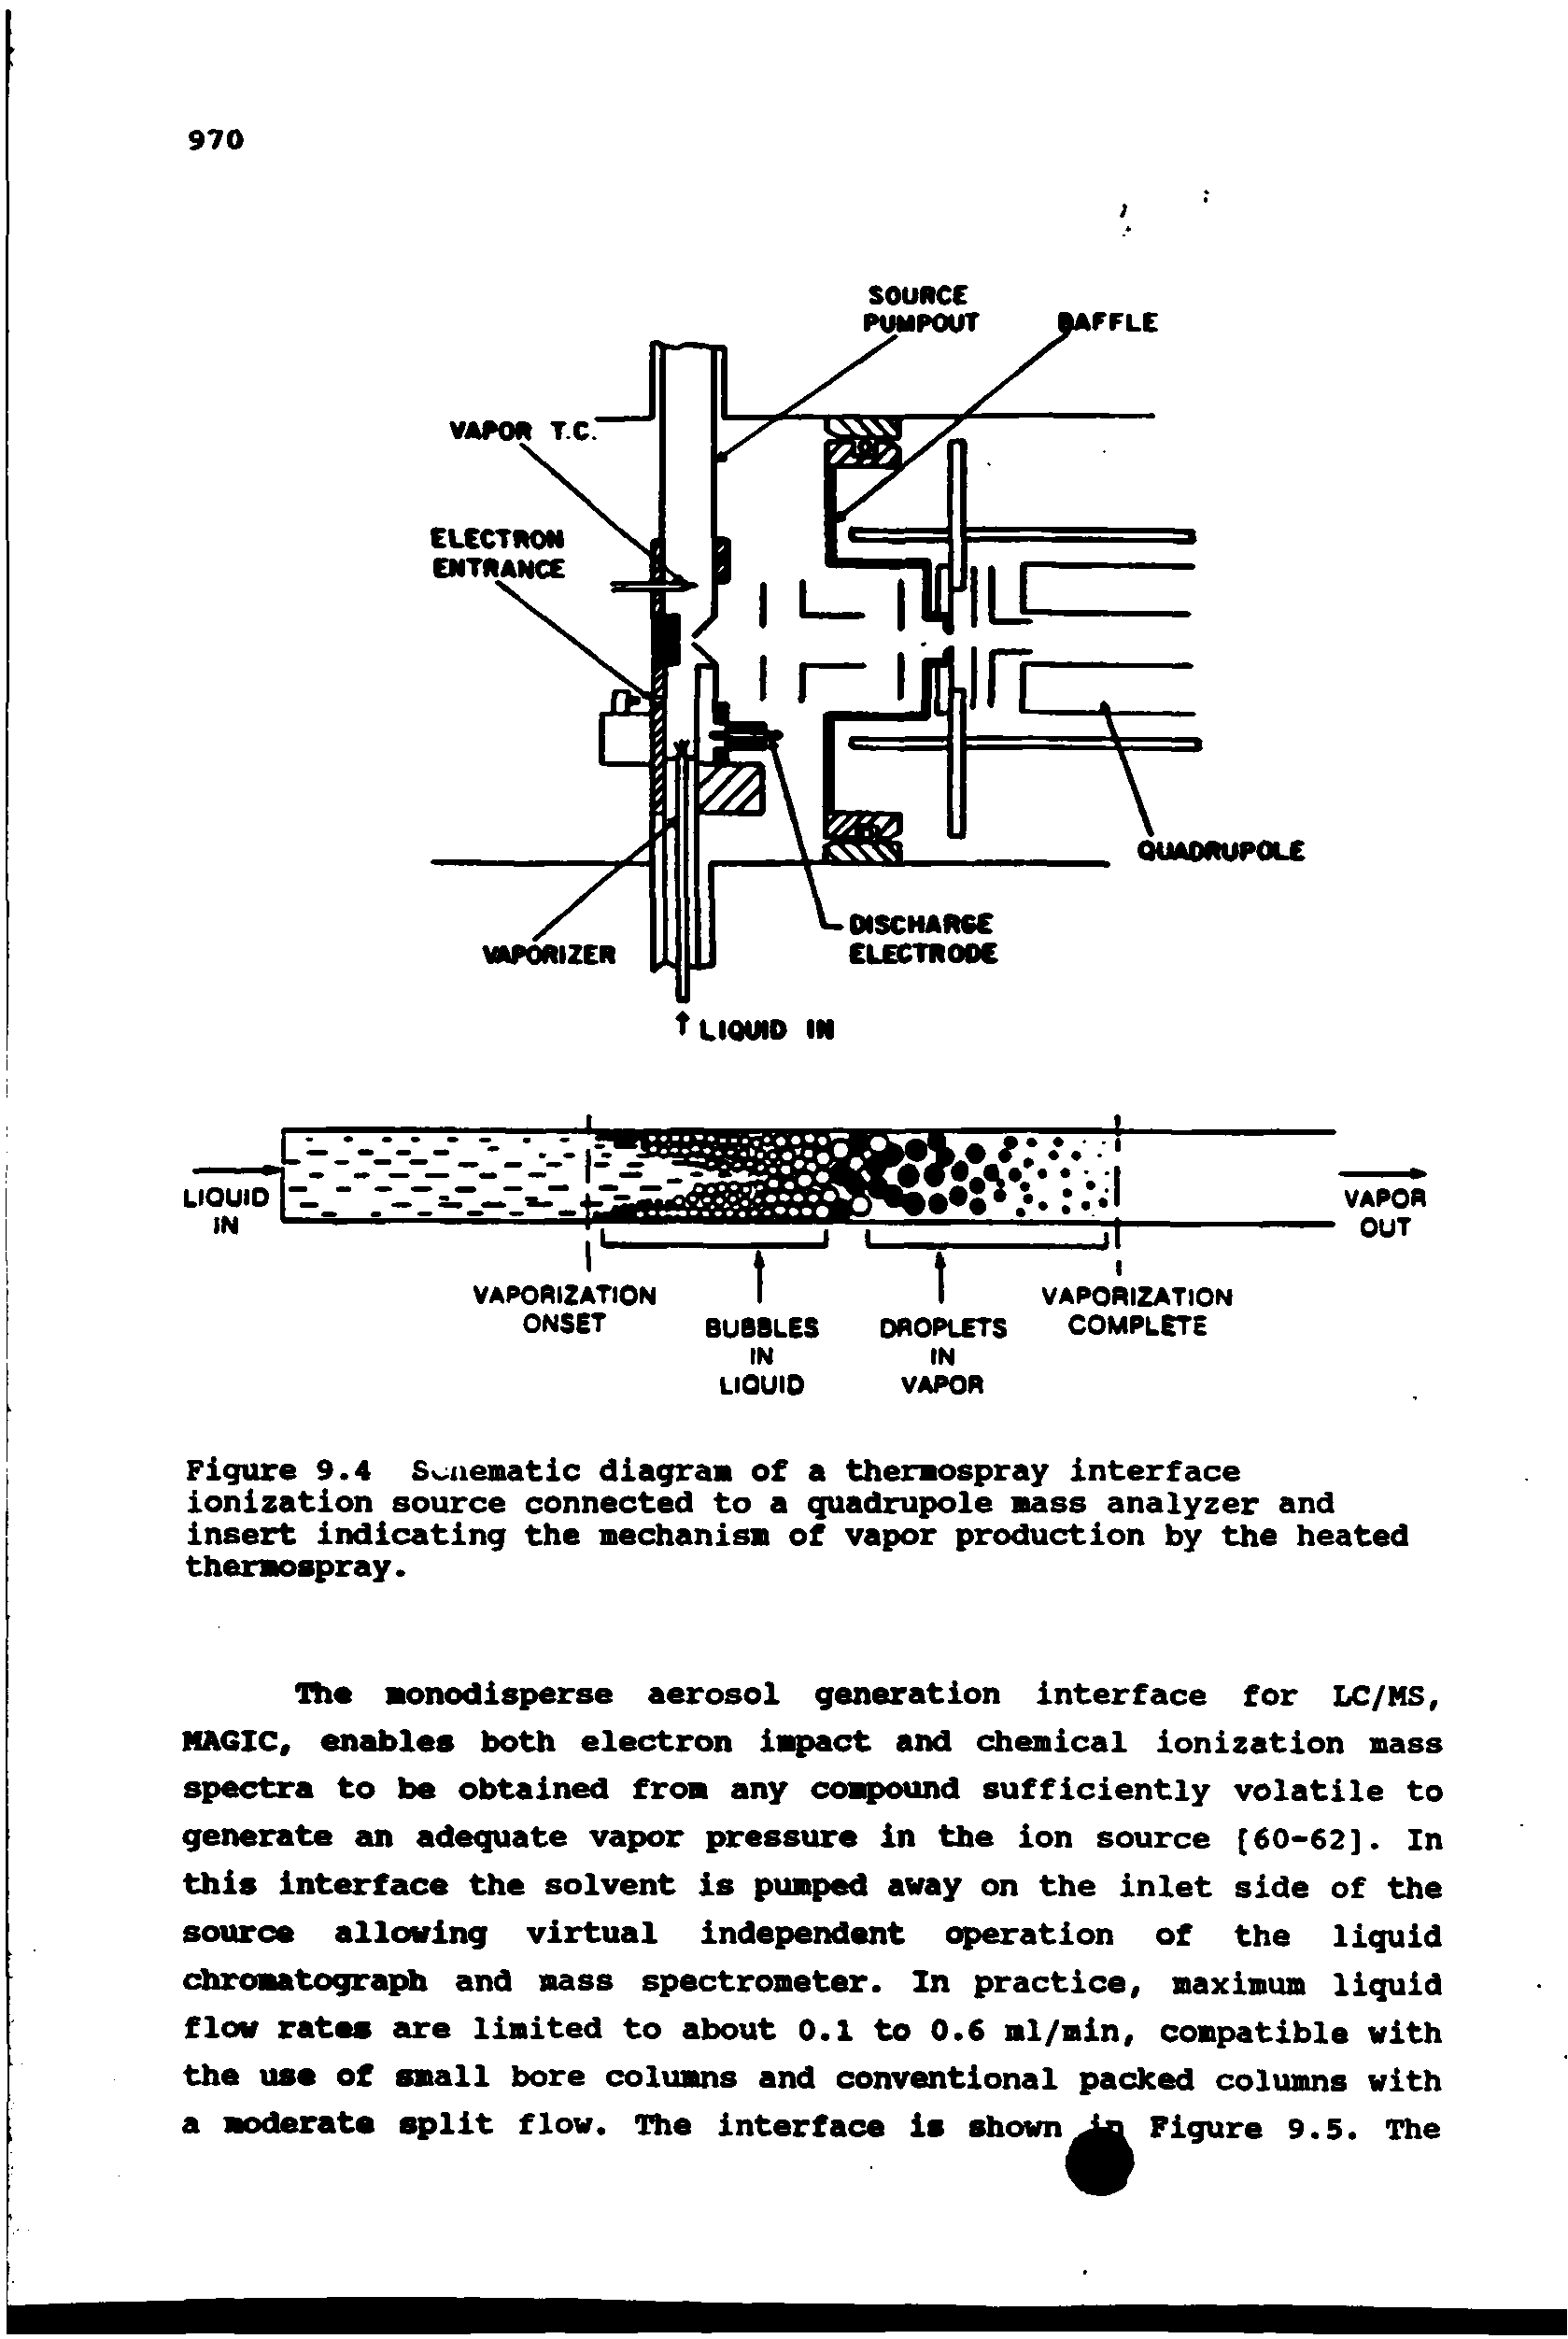 Figure 9.4 Soaematic diagram of a thexmospray interface ionization source connected to a quadrupole mass analyzer and Insert indicating the mechanism of vapor production by the heated thermospray.